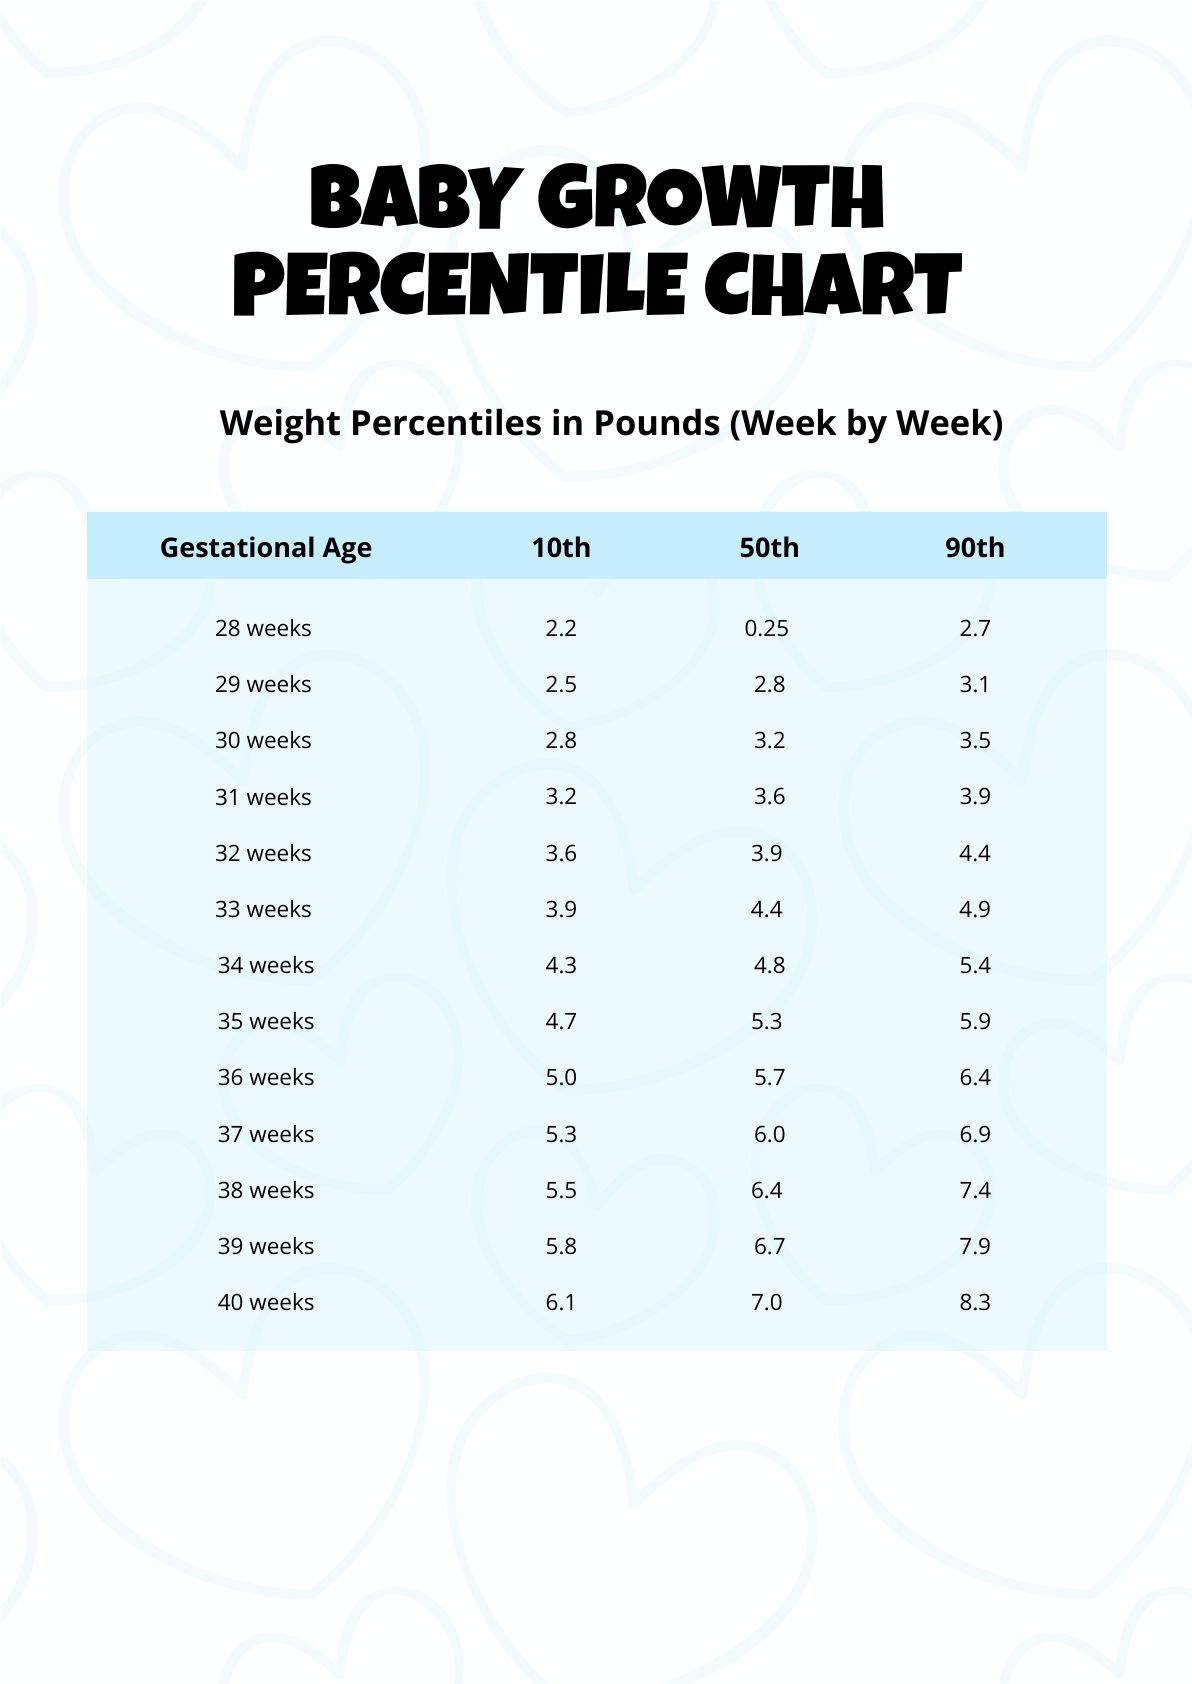 Baby Growth Percentile Chart in PDF